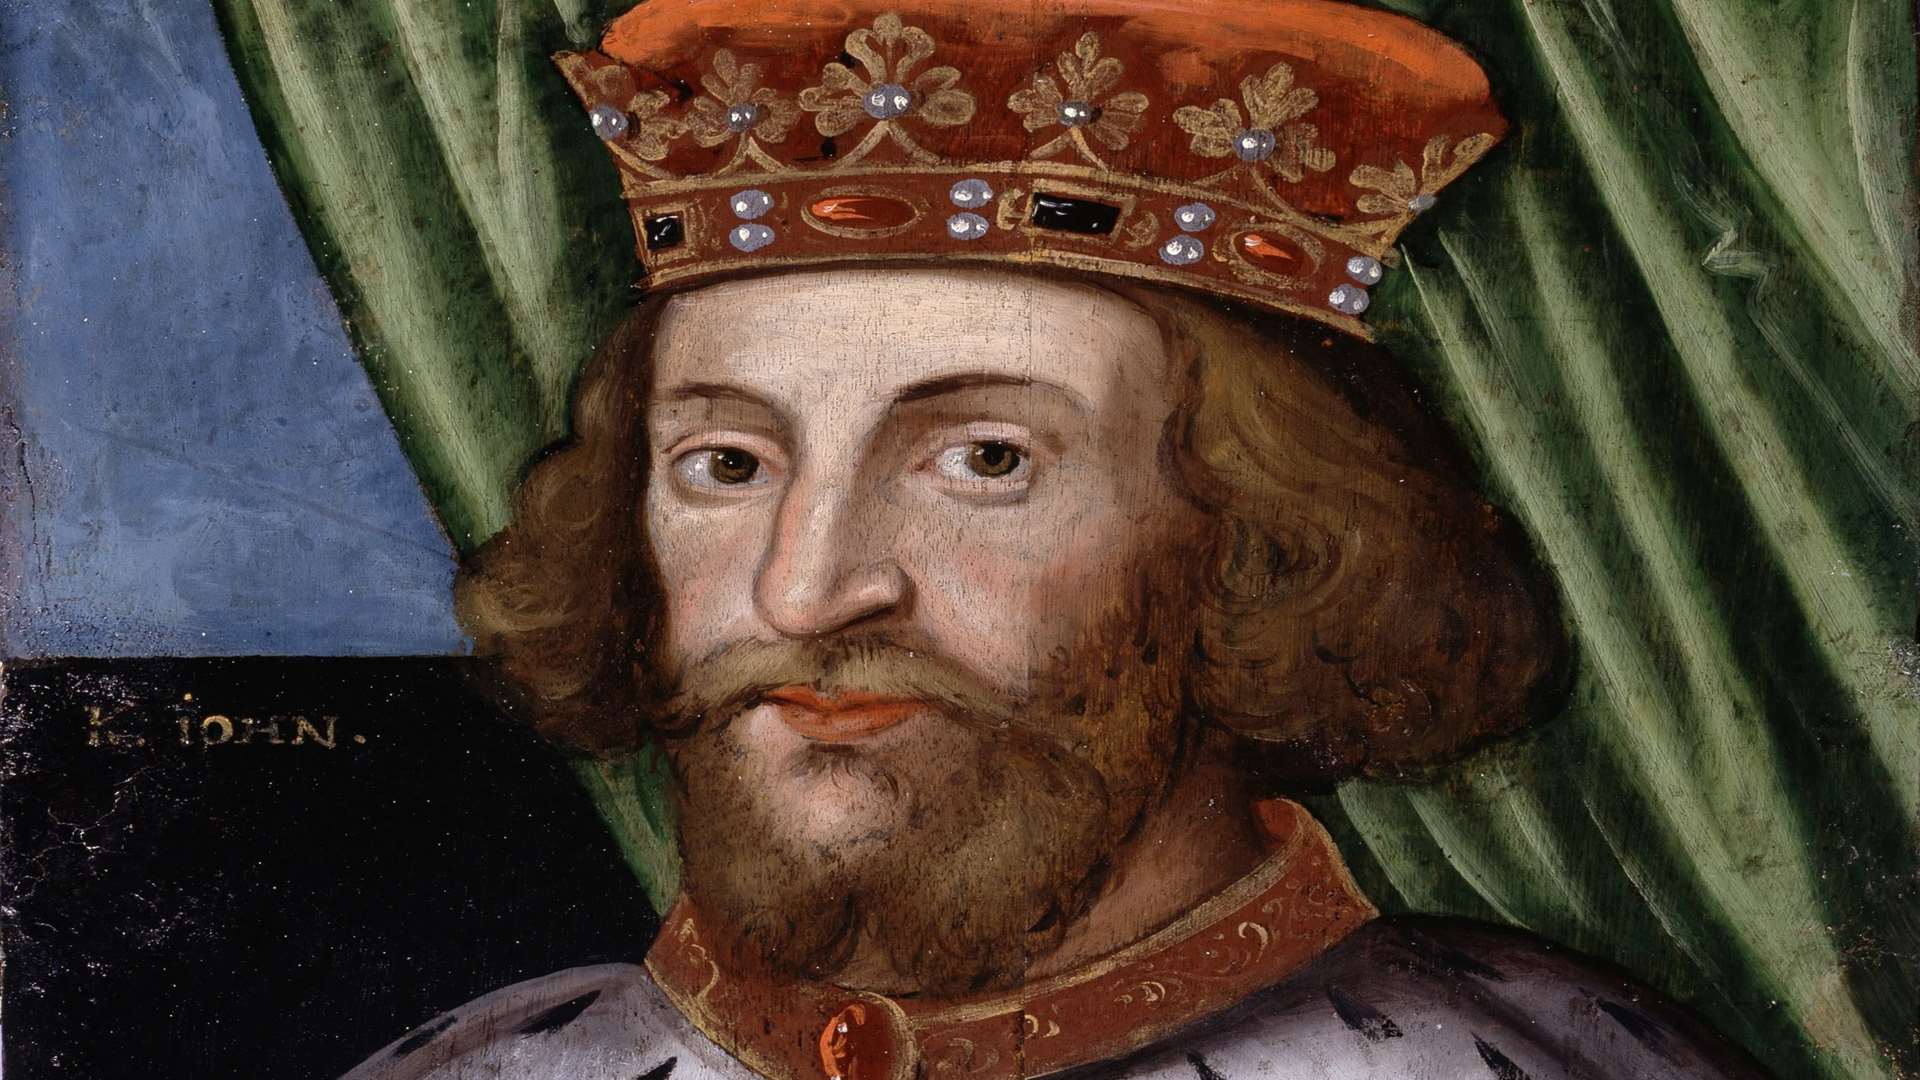 King John, who signed the Magna Carta in 1215